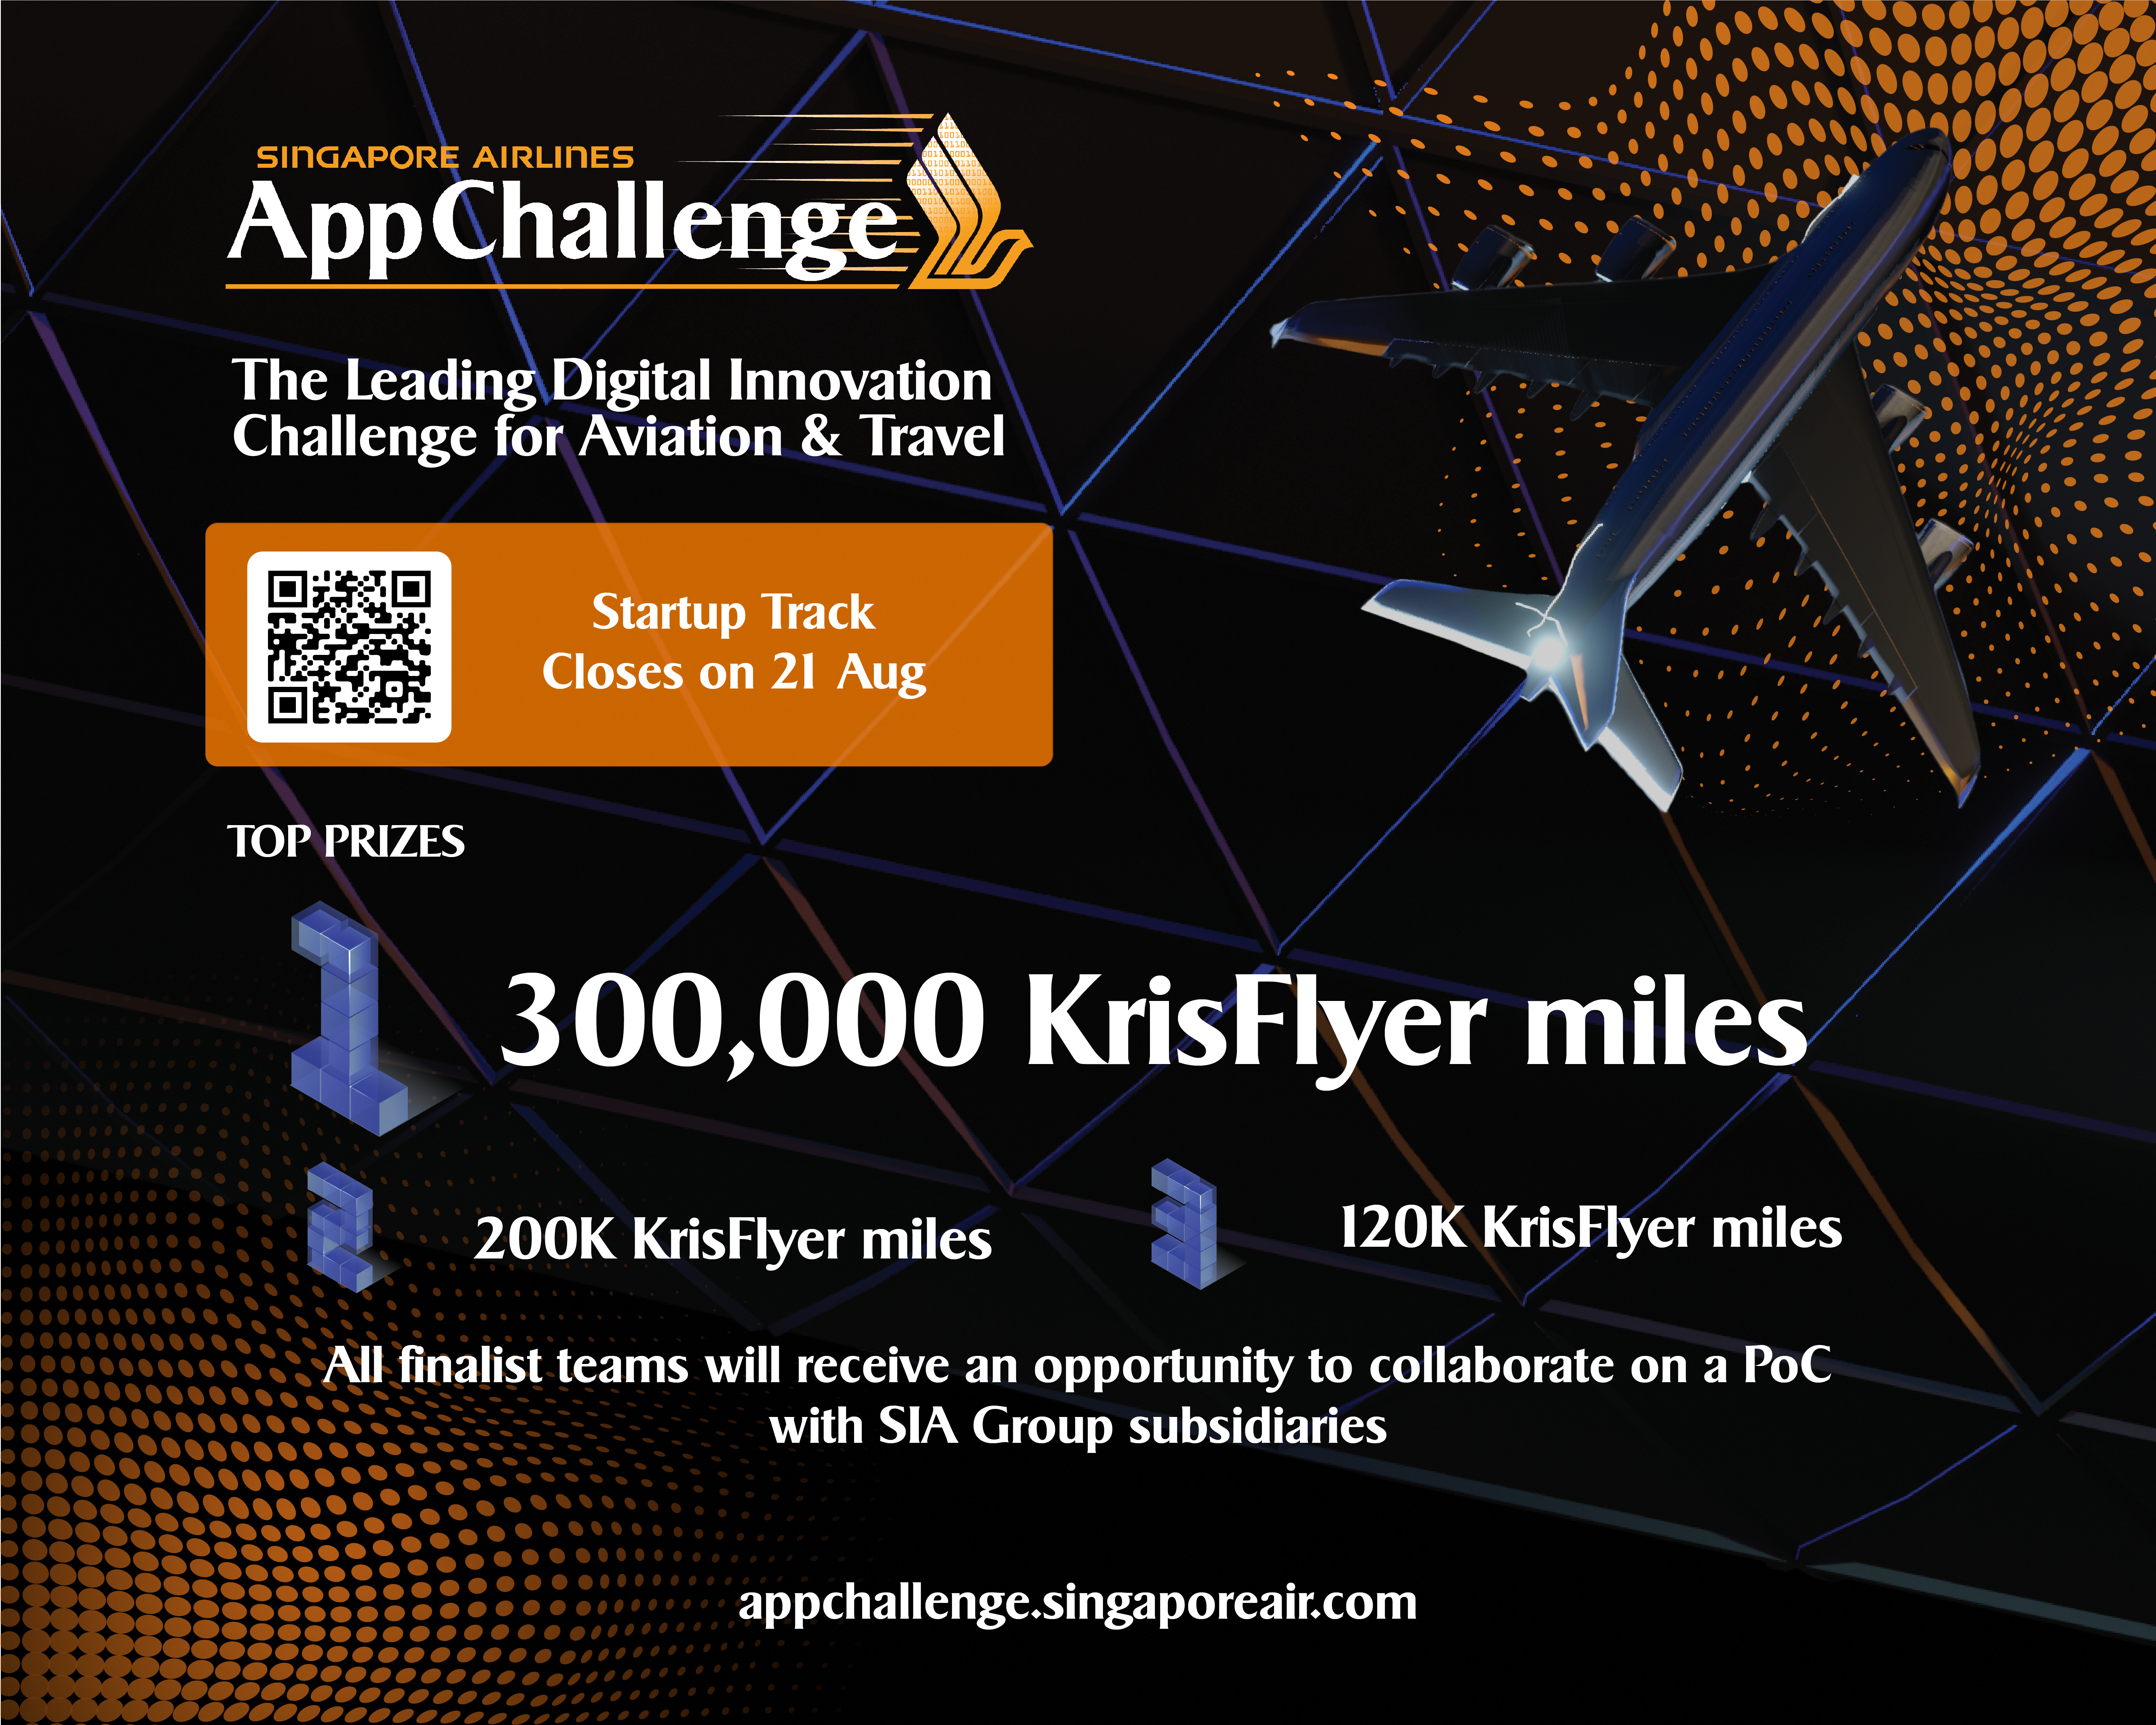 Singapore Airlines AppChallenge 2022